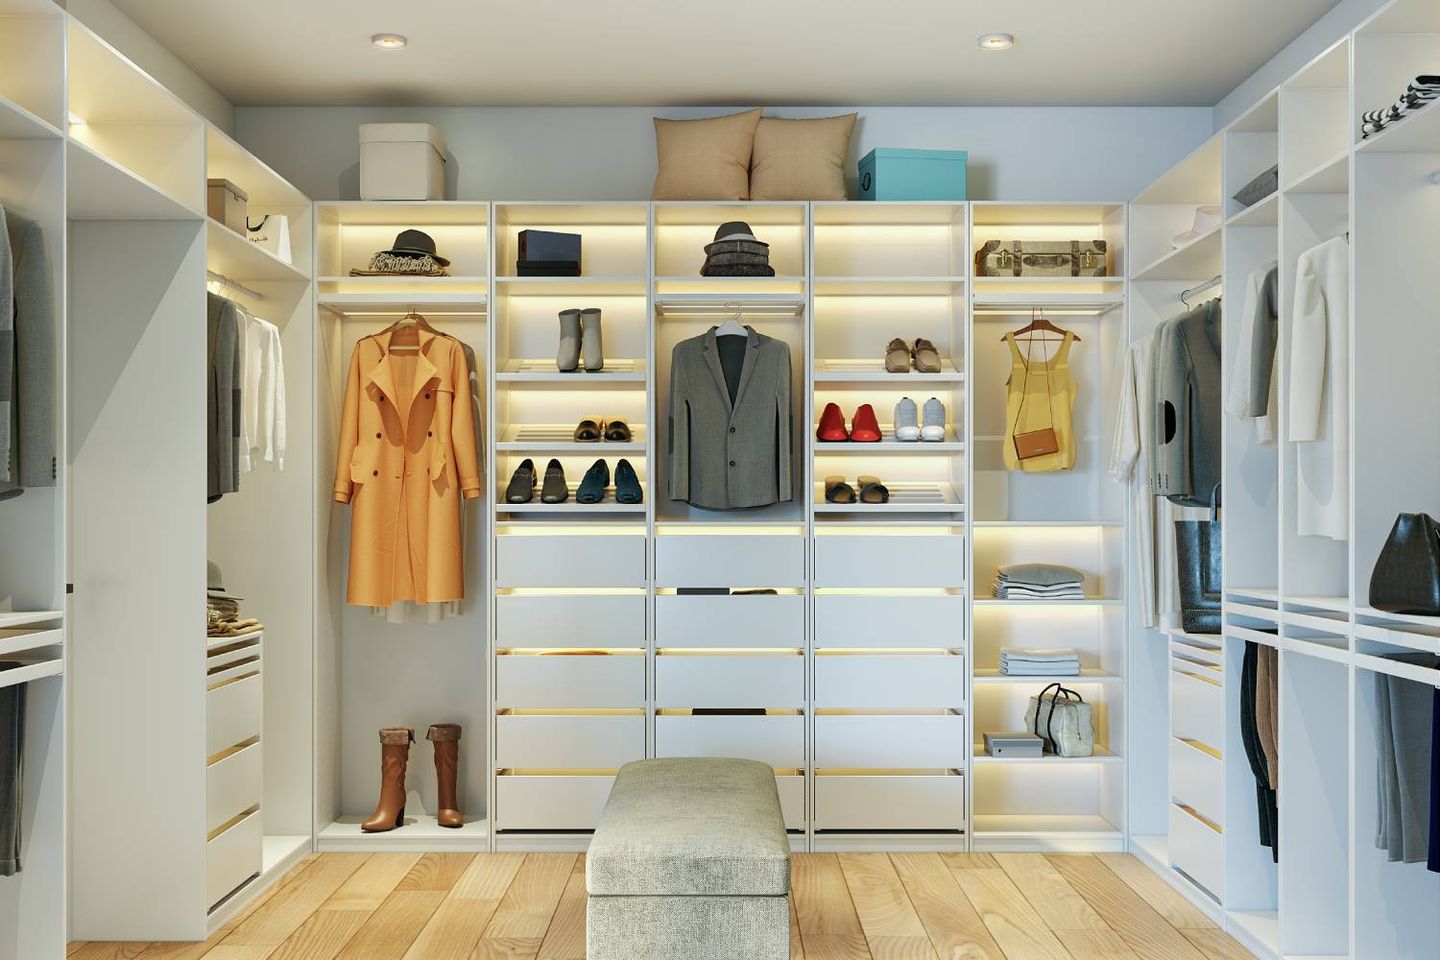 Walk In Wardrobe With Open Display For Fashion Accessories - Livspace